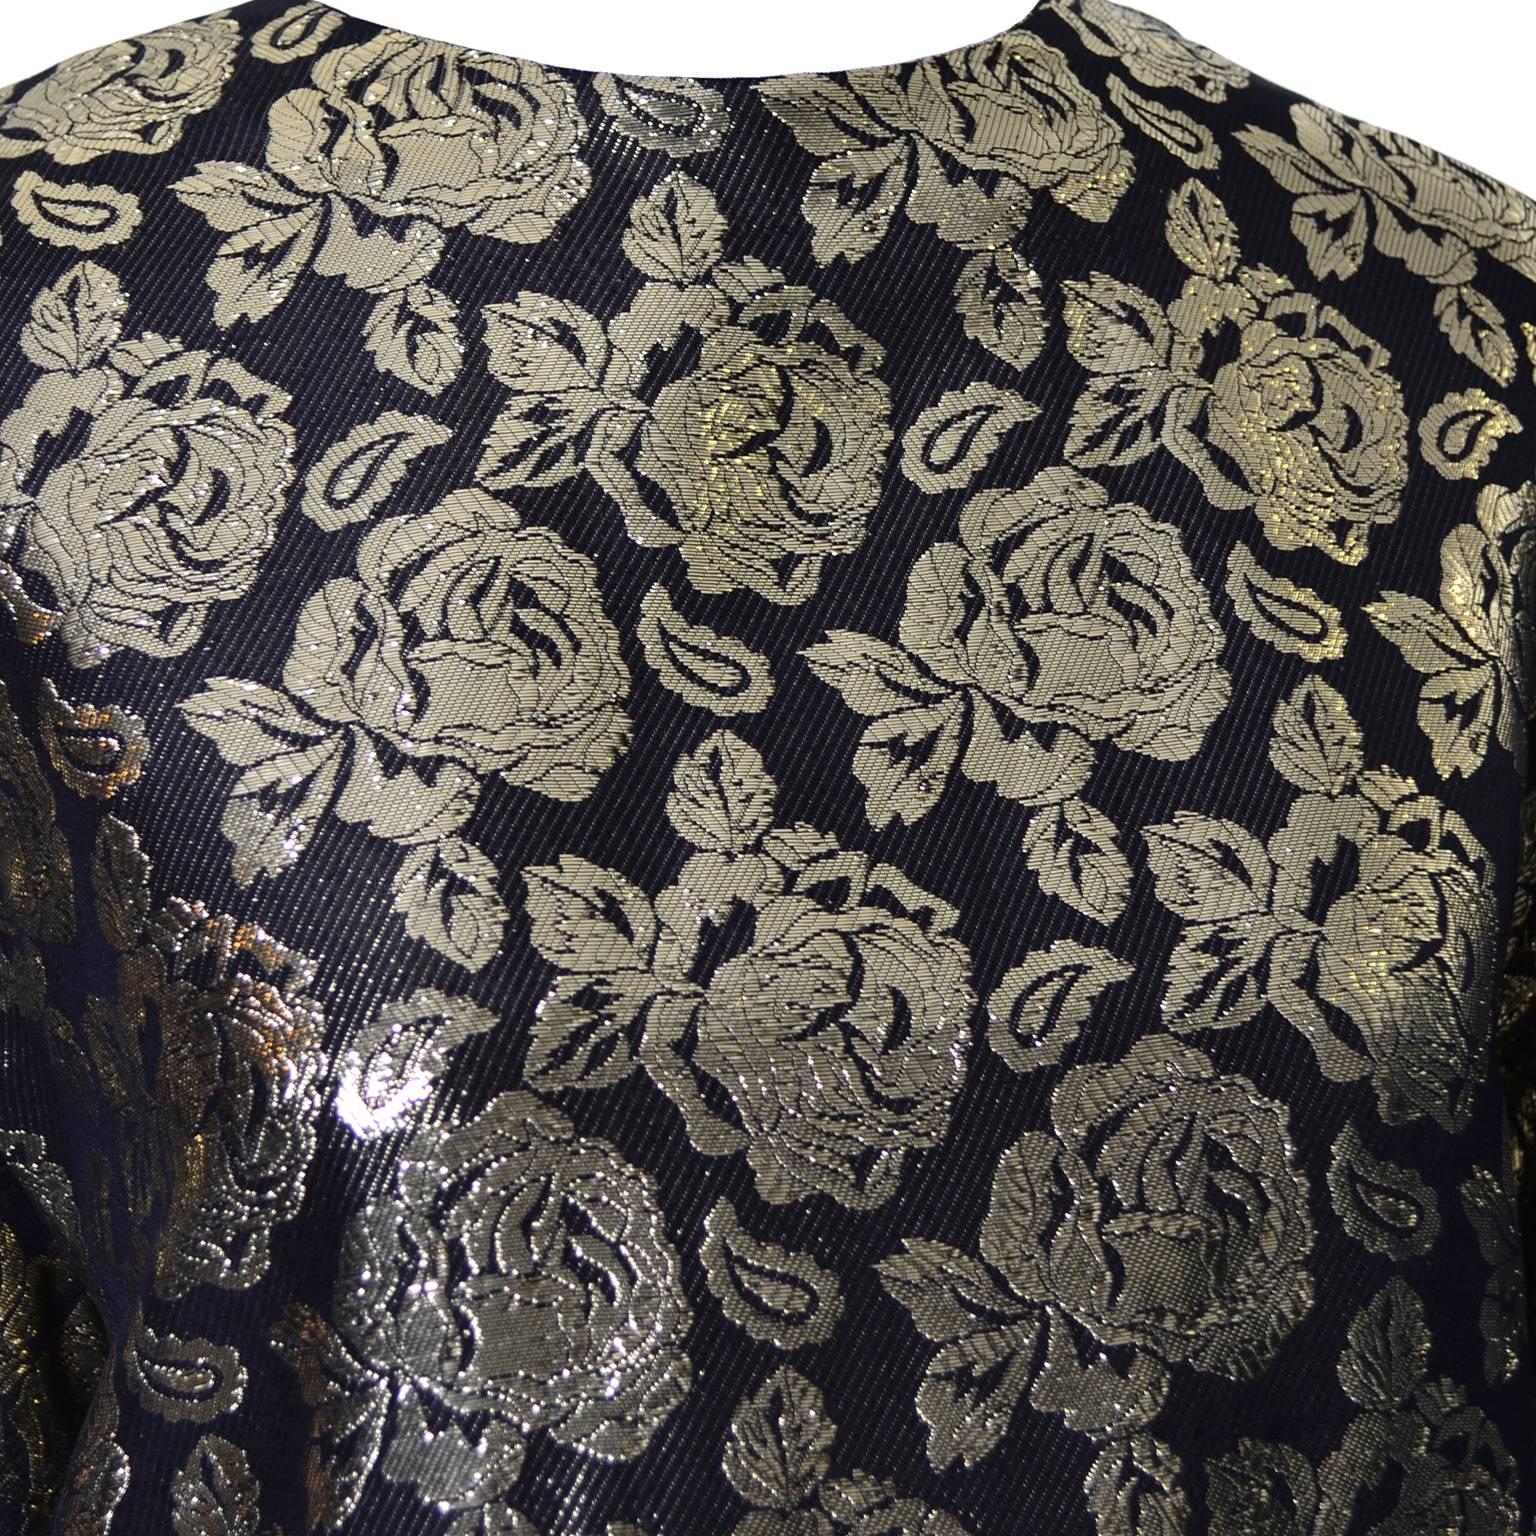 This is a beautiful Gloria Sachs black metallic vintage evening blouse with gold metallic roses from the 1980’s and is in excellent condition.  The blouse buttons at the neck in the back and has long sleeves that are slightly gathered at the